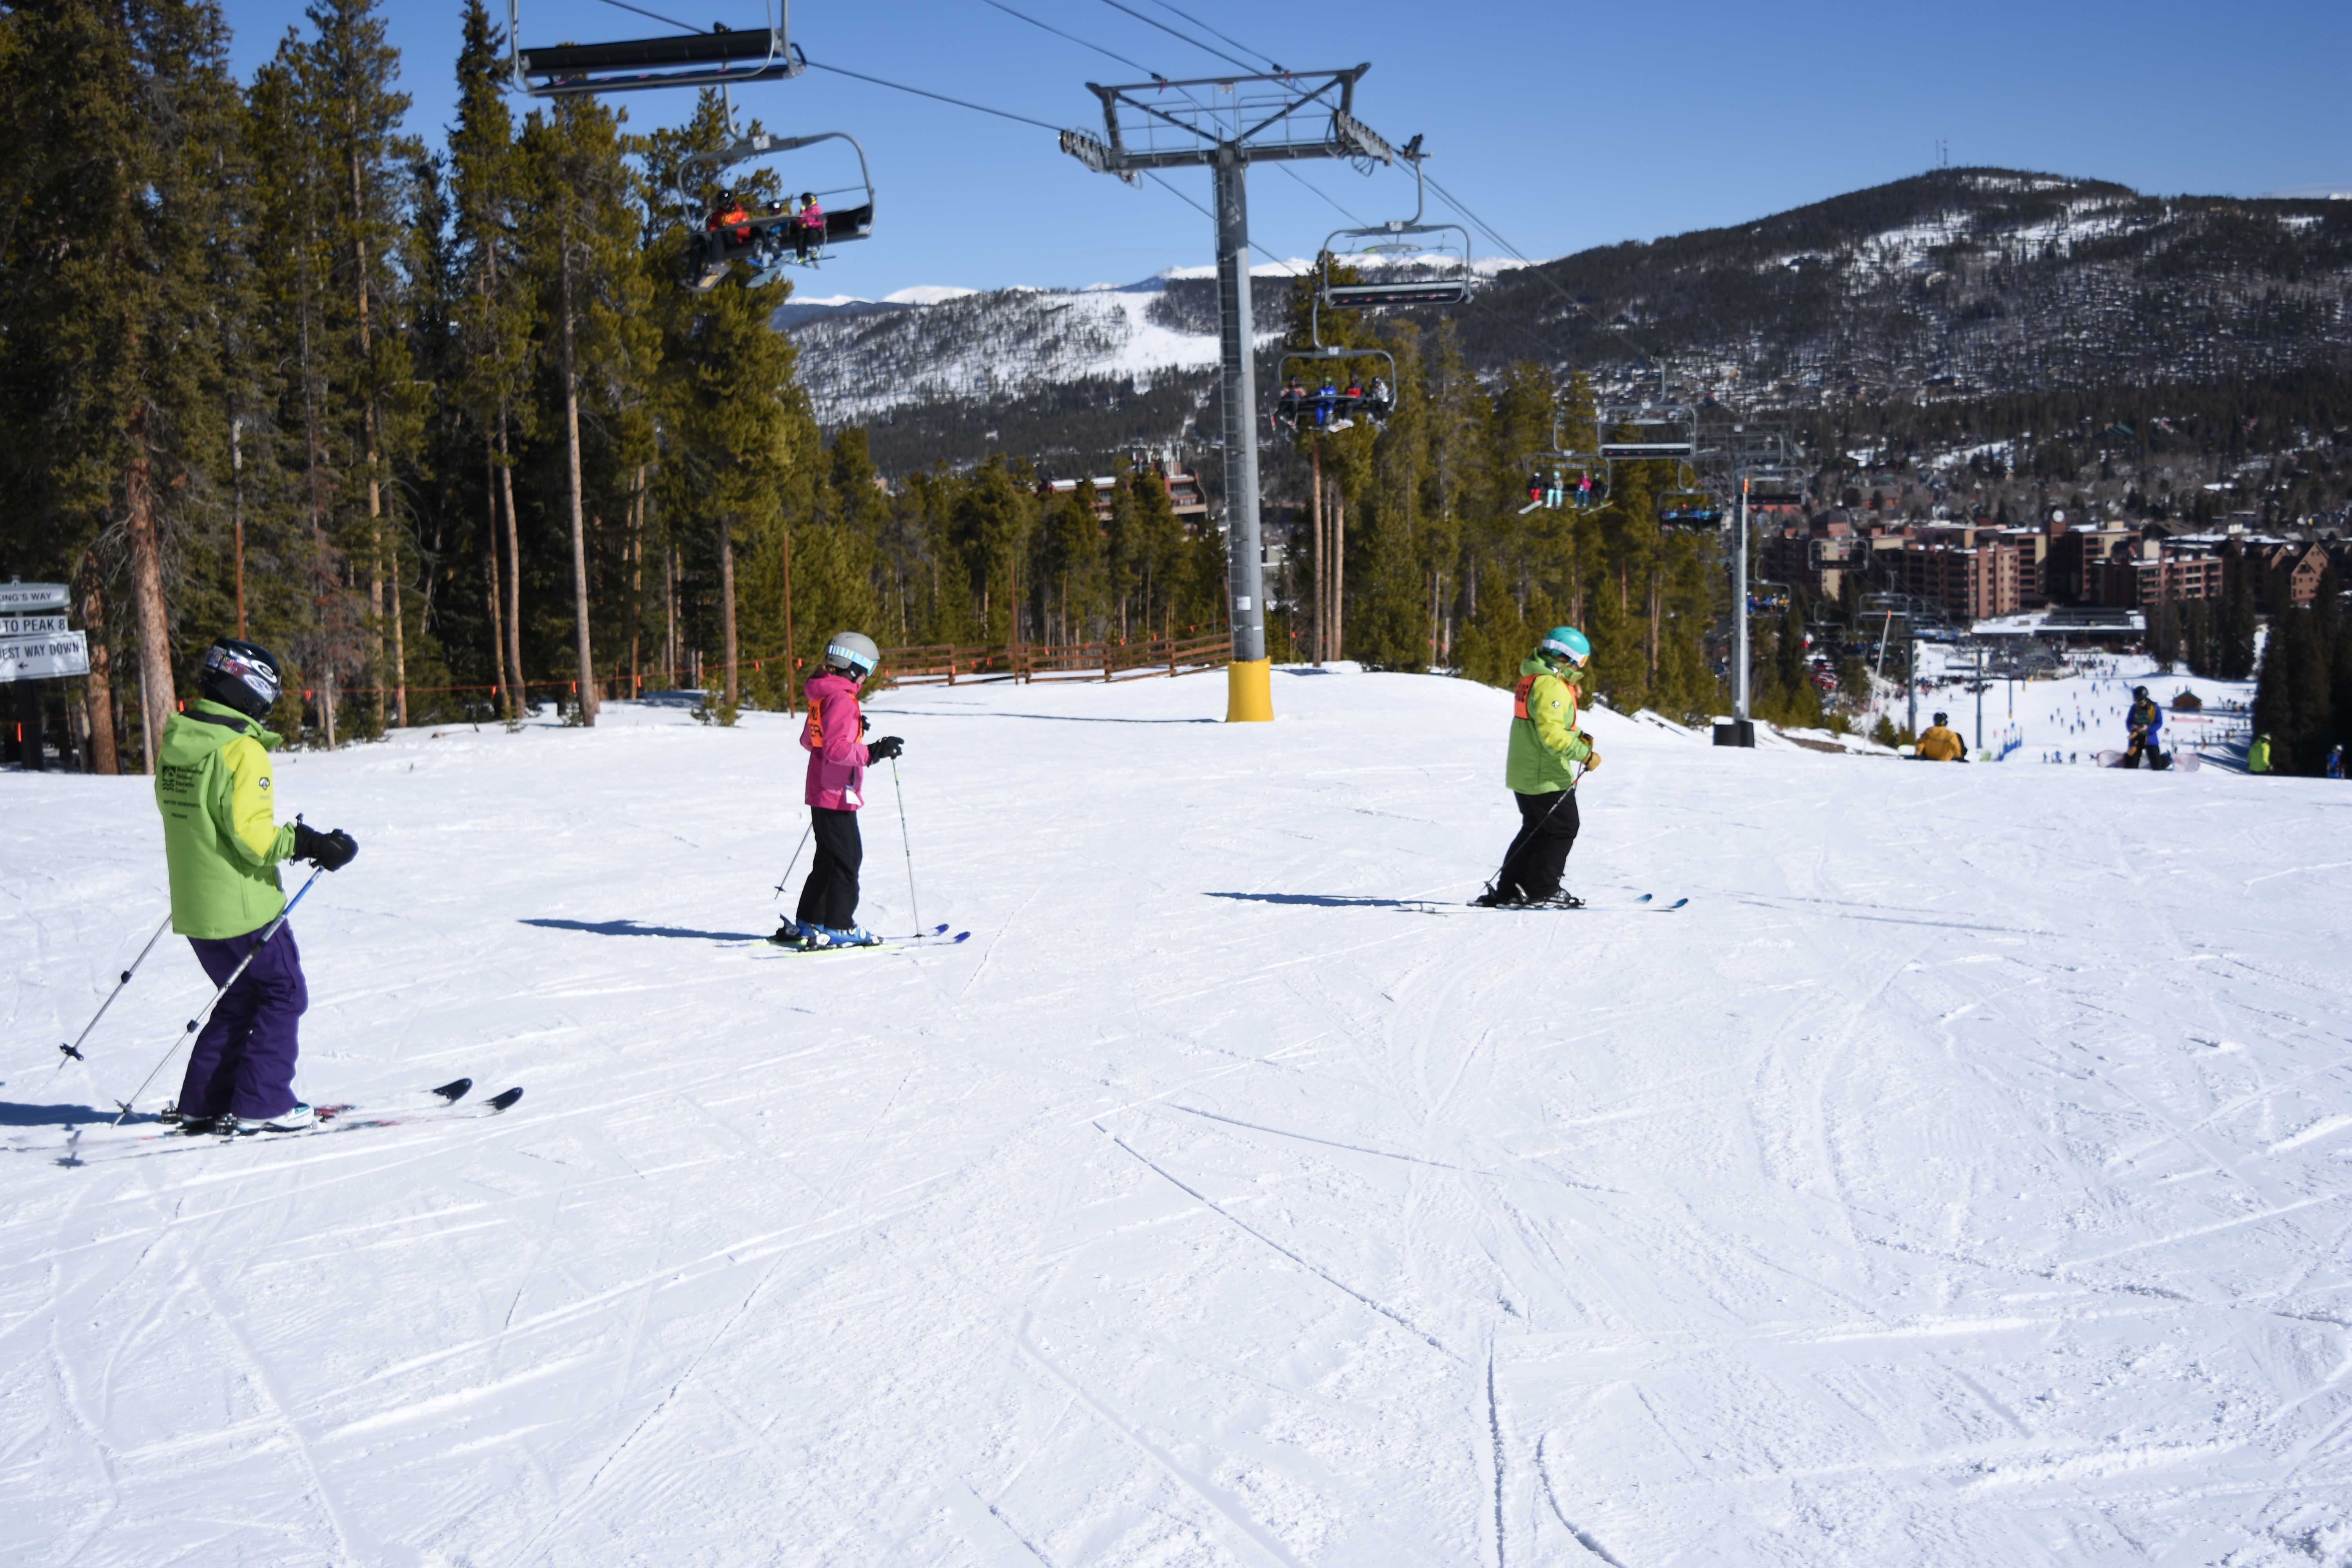 In a bright pink jacket, Caroline follows a guide wearing a green jacket toward the bottom of the hill in front of them. Another guide in a green jacket follows behind Caroline. There is a ski lift and trees to their left and open space to their right.